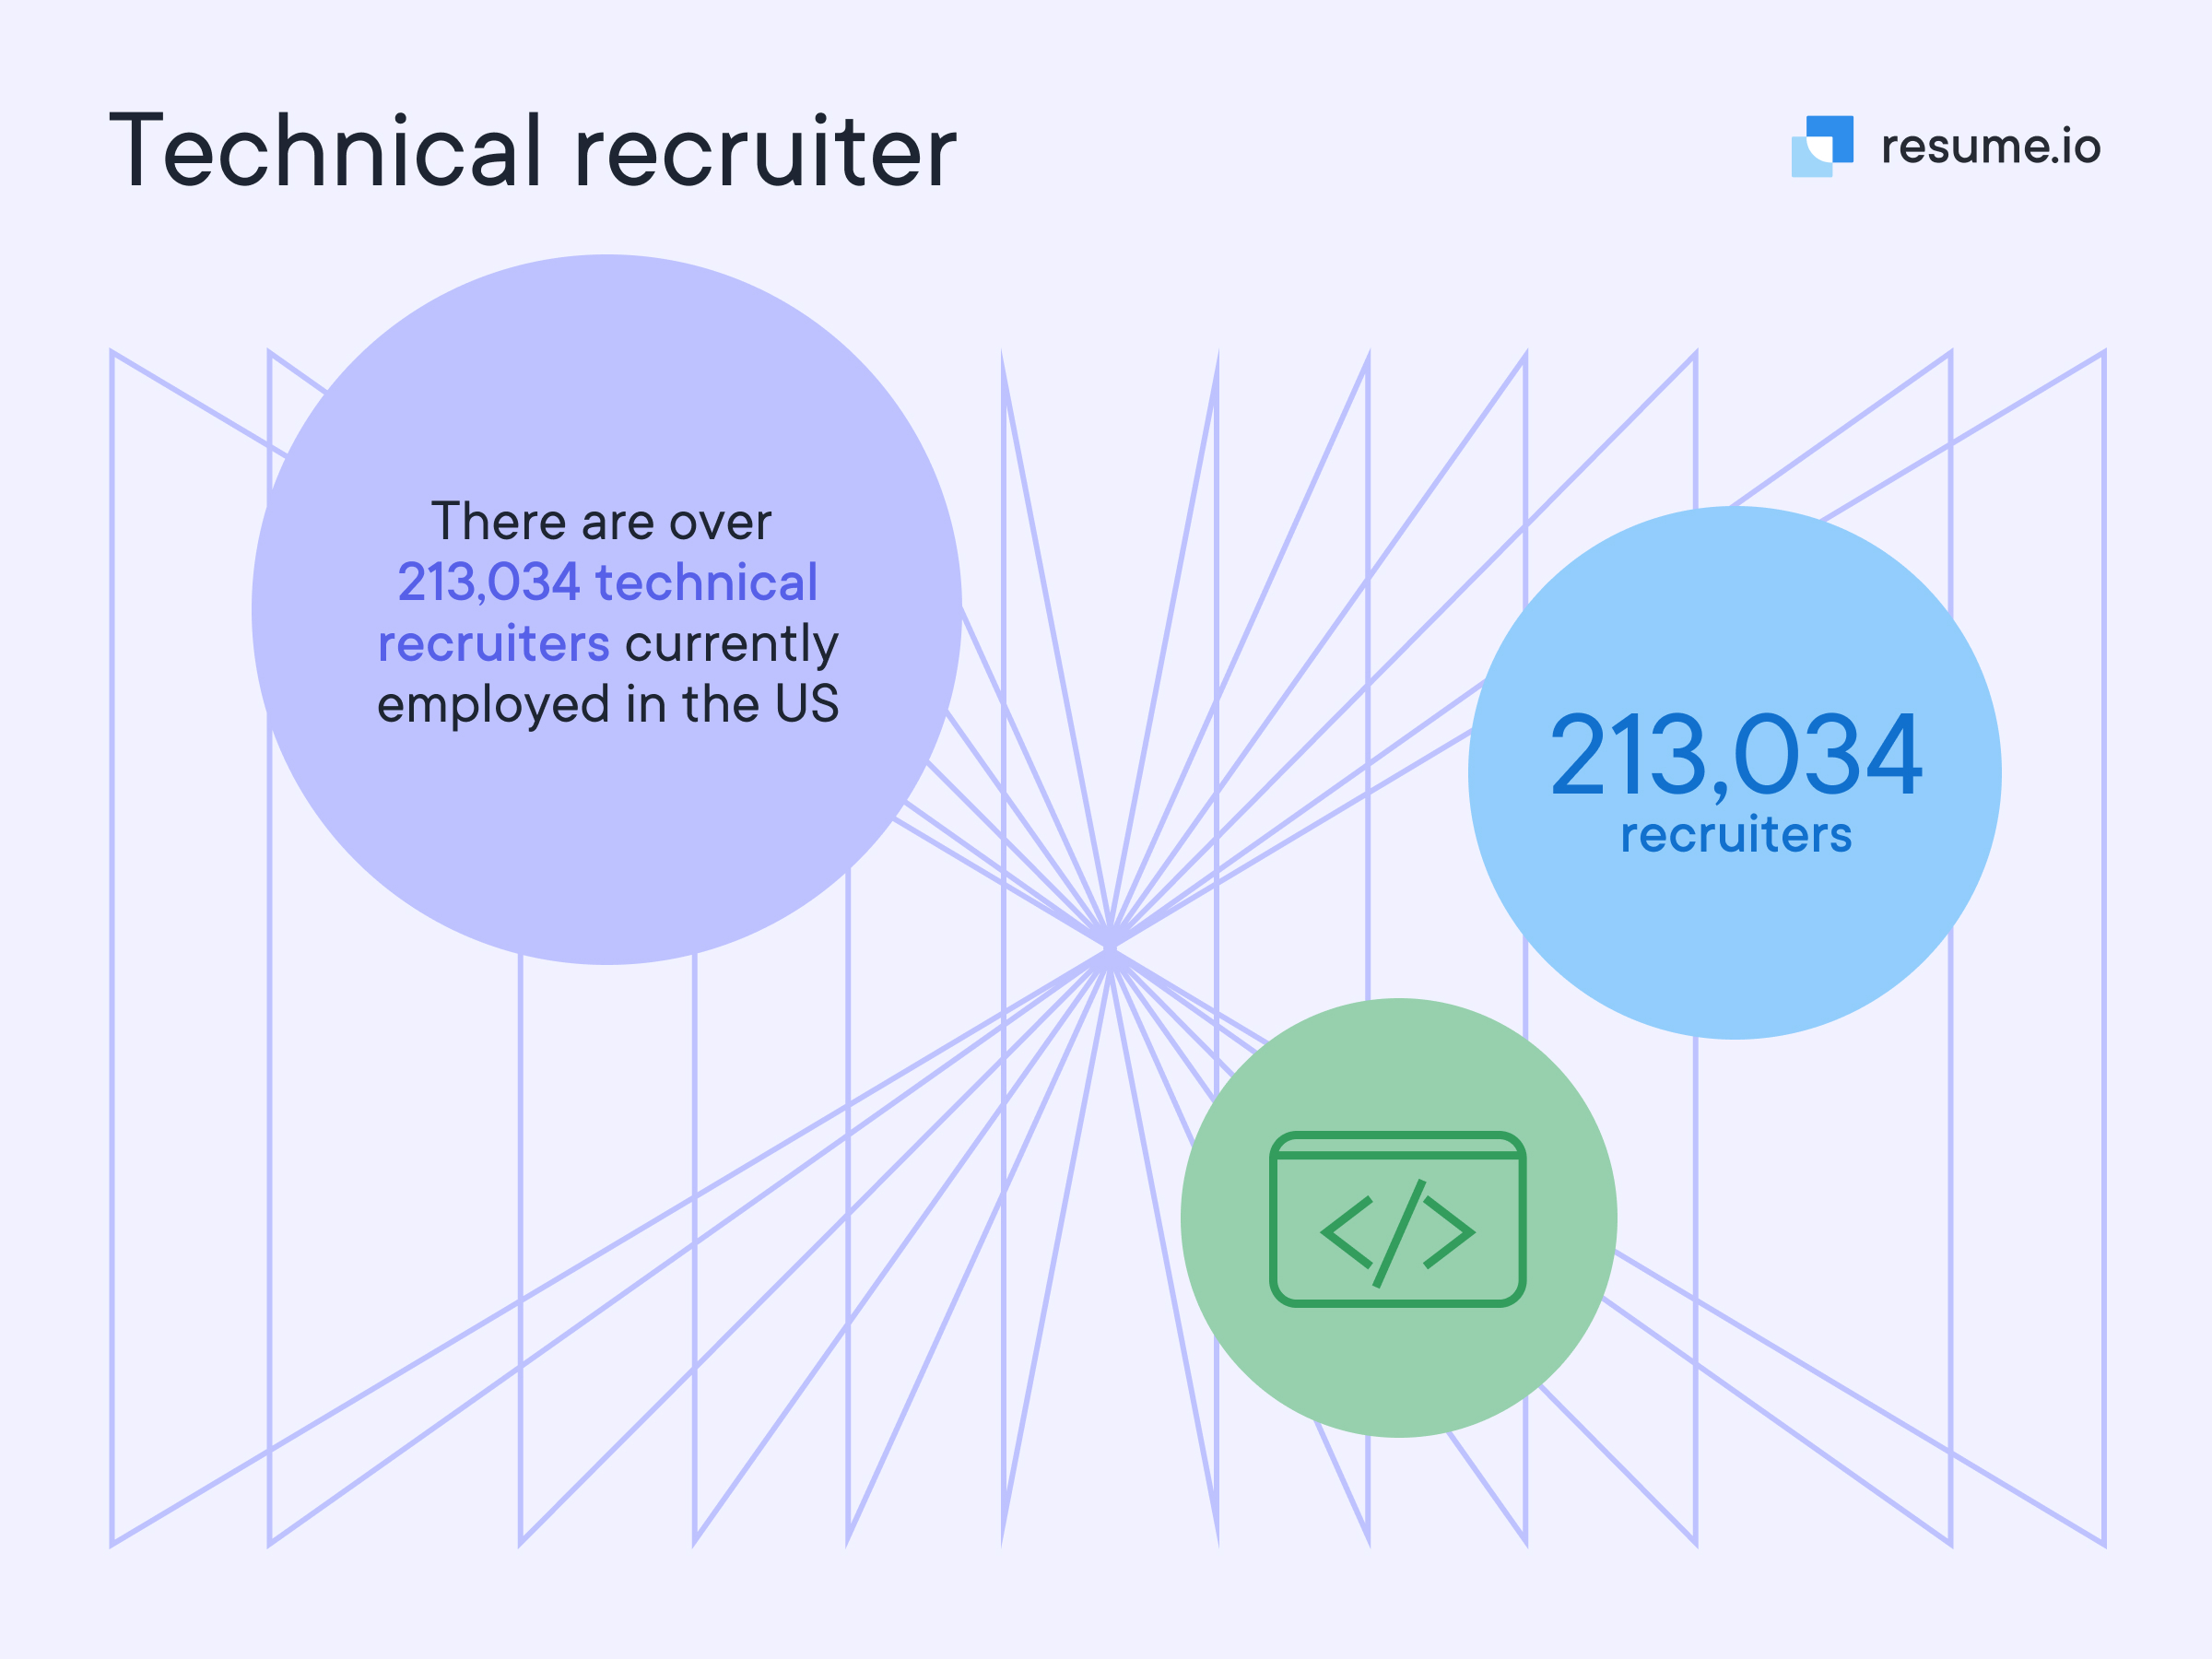 Over 213,034 technical recruiters are employed in the US